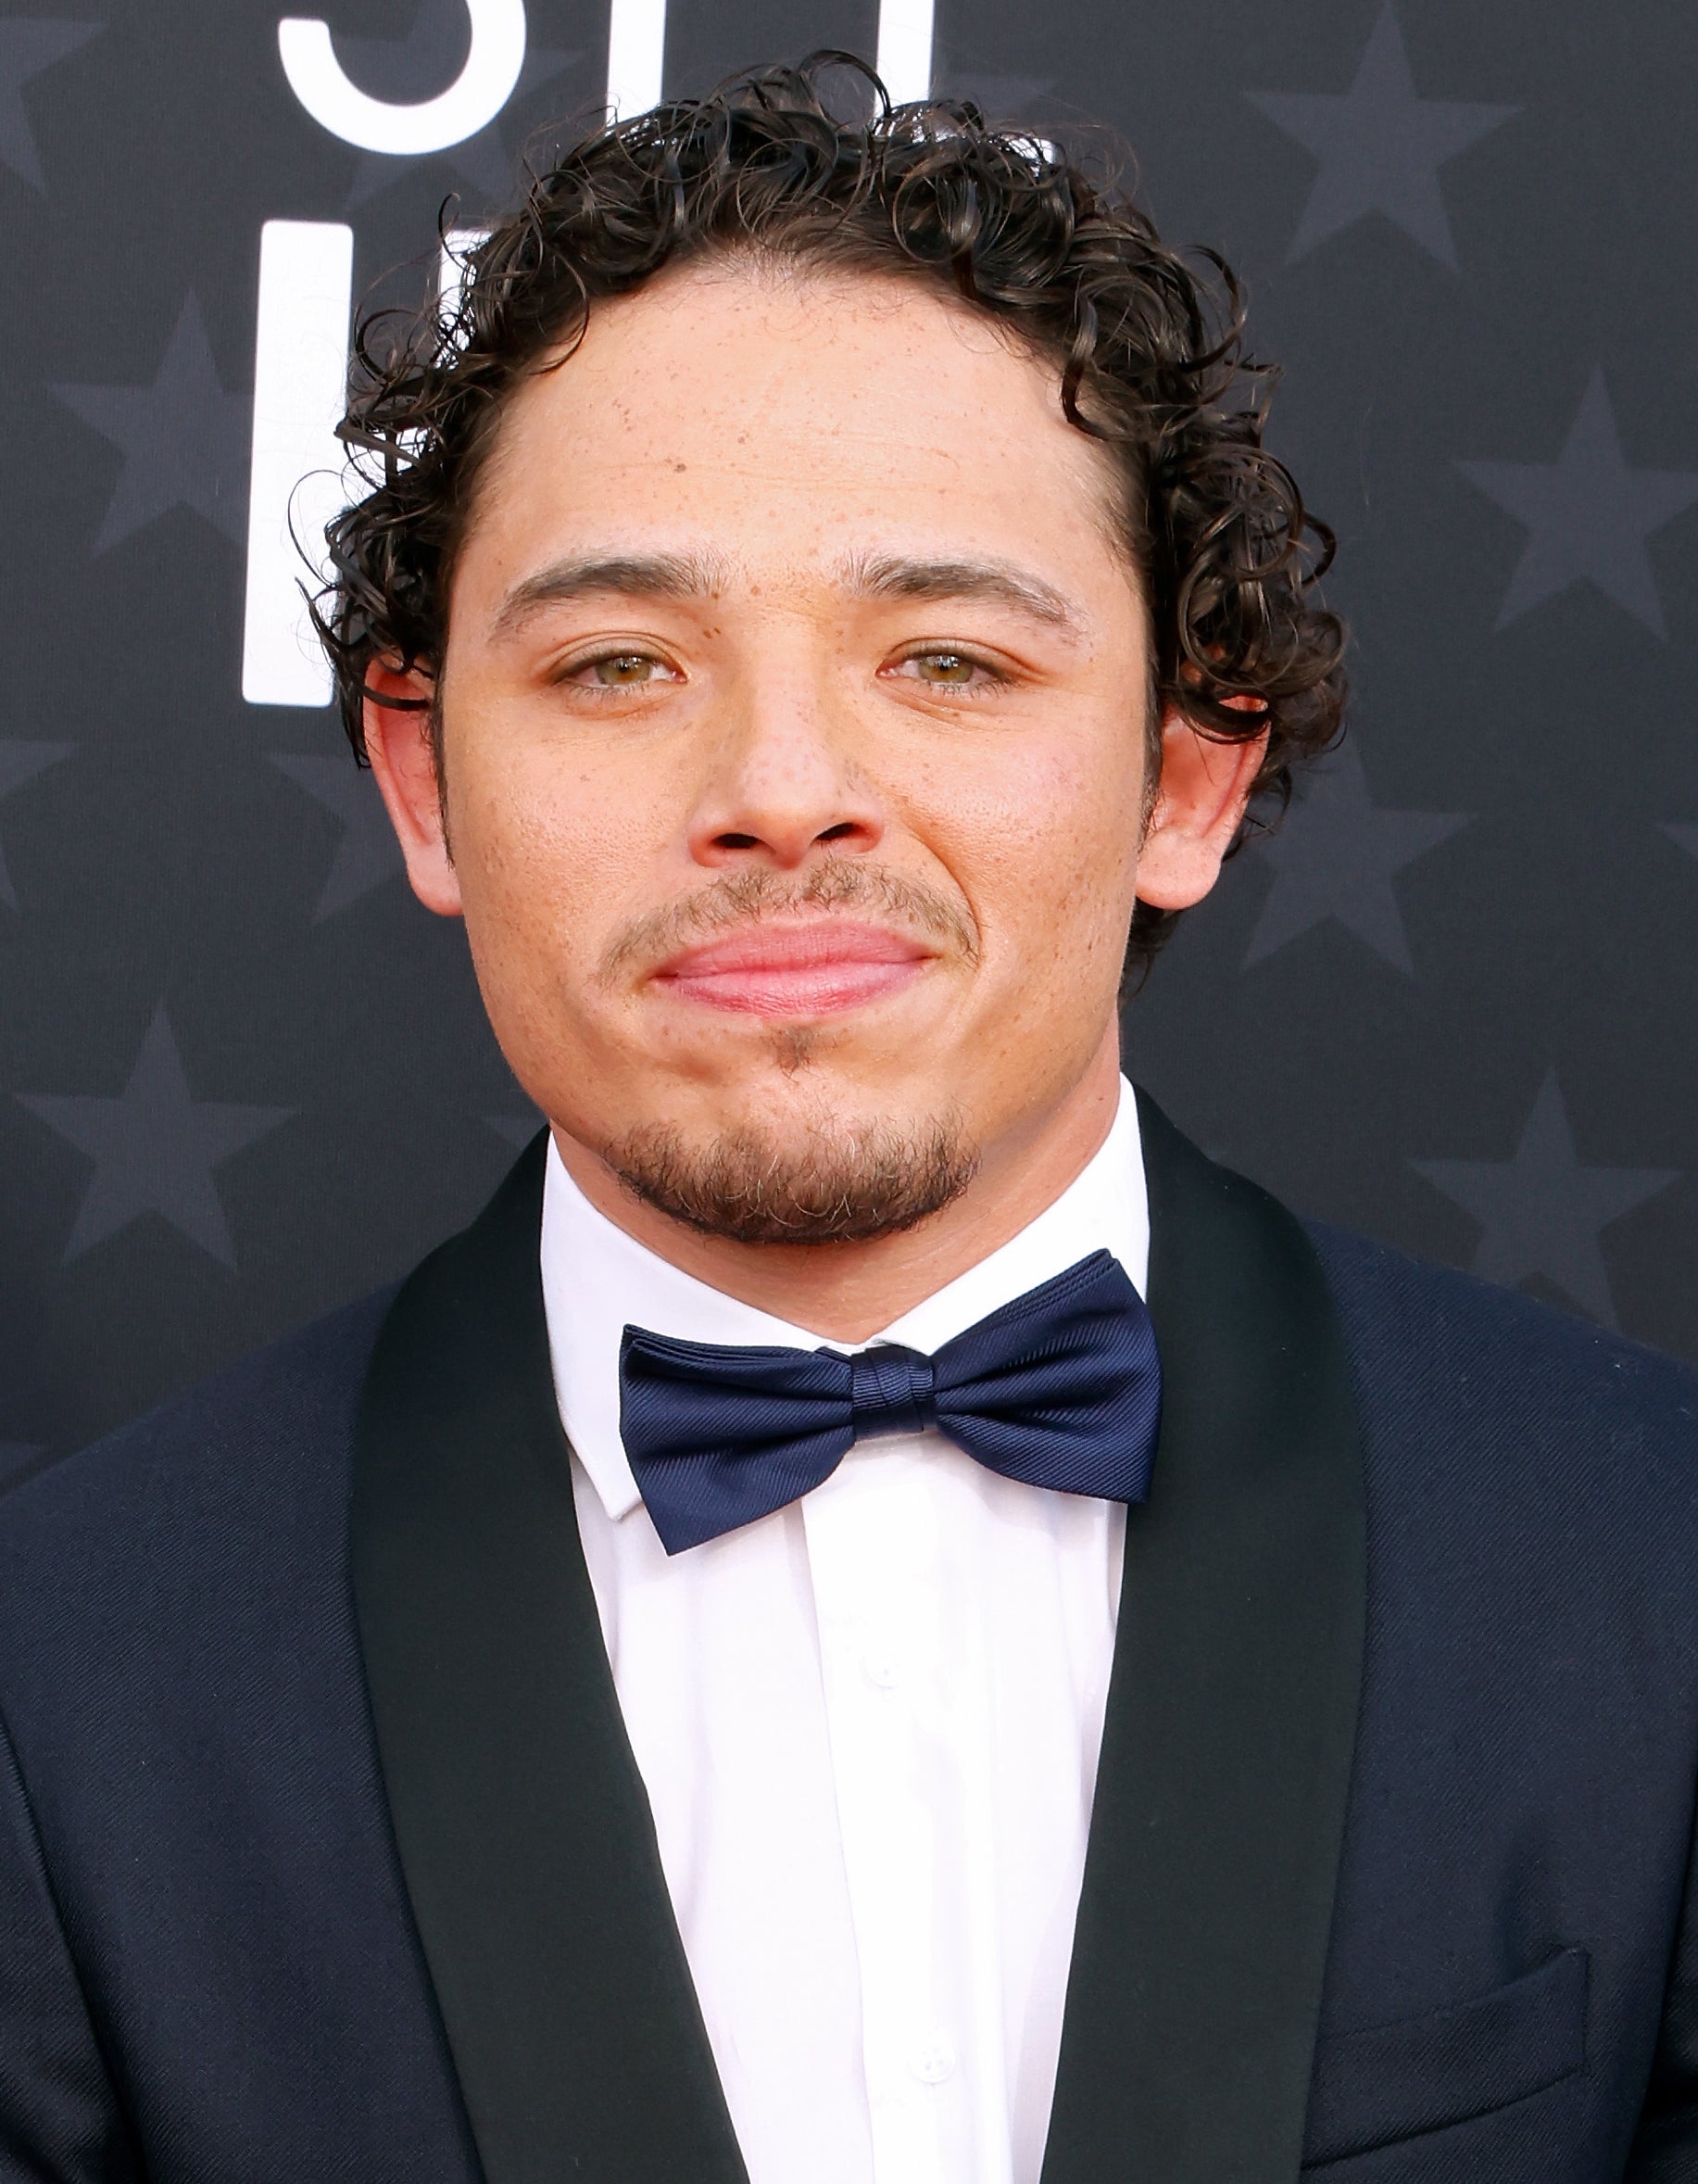 Anthony Ramos in a tuxedo and bow tie posing at an event